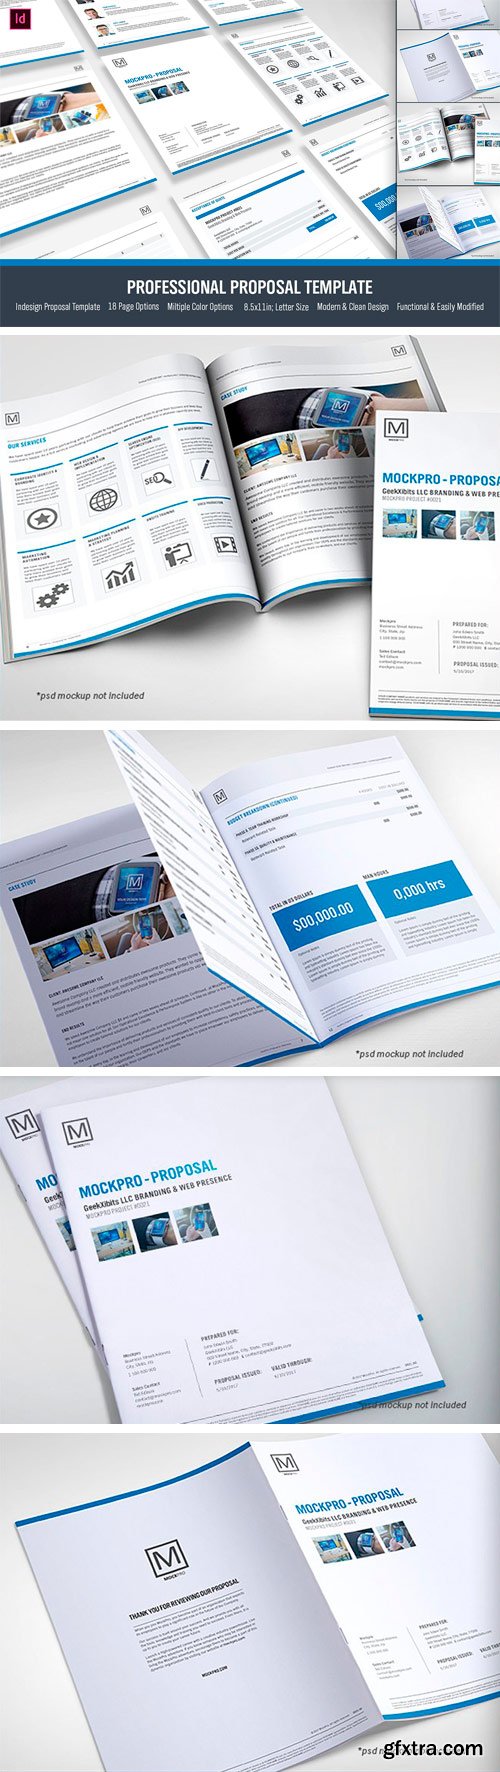 CM - Simple Proposal Template Indesign 2294901